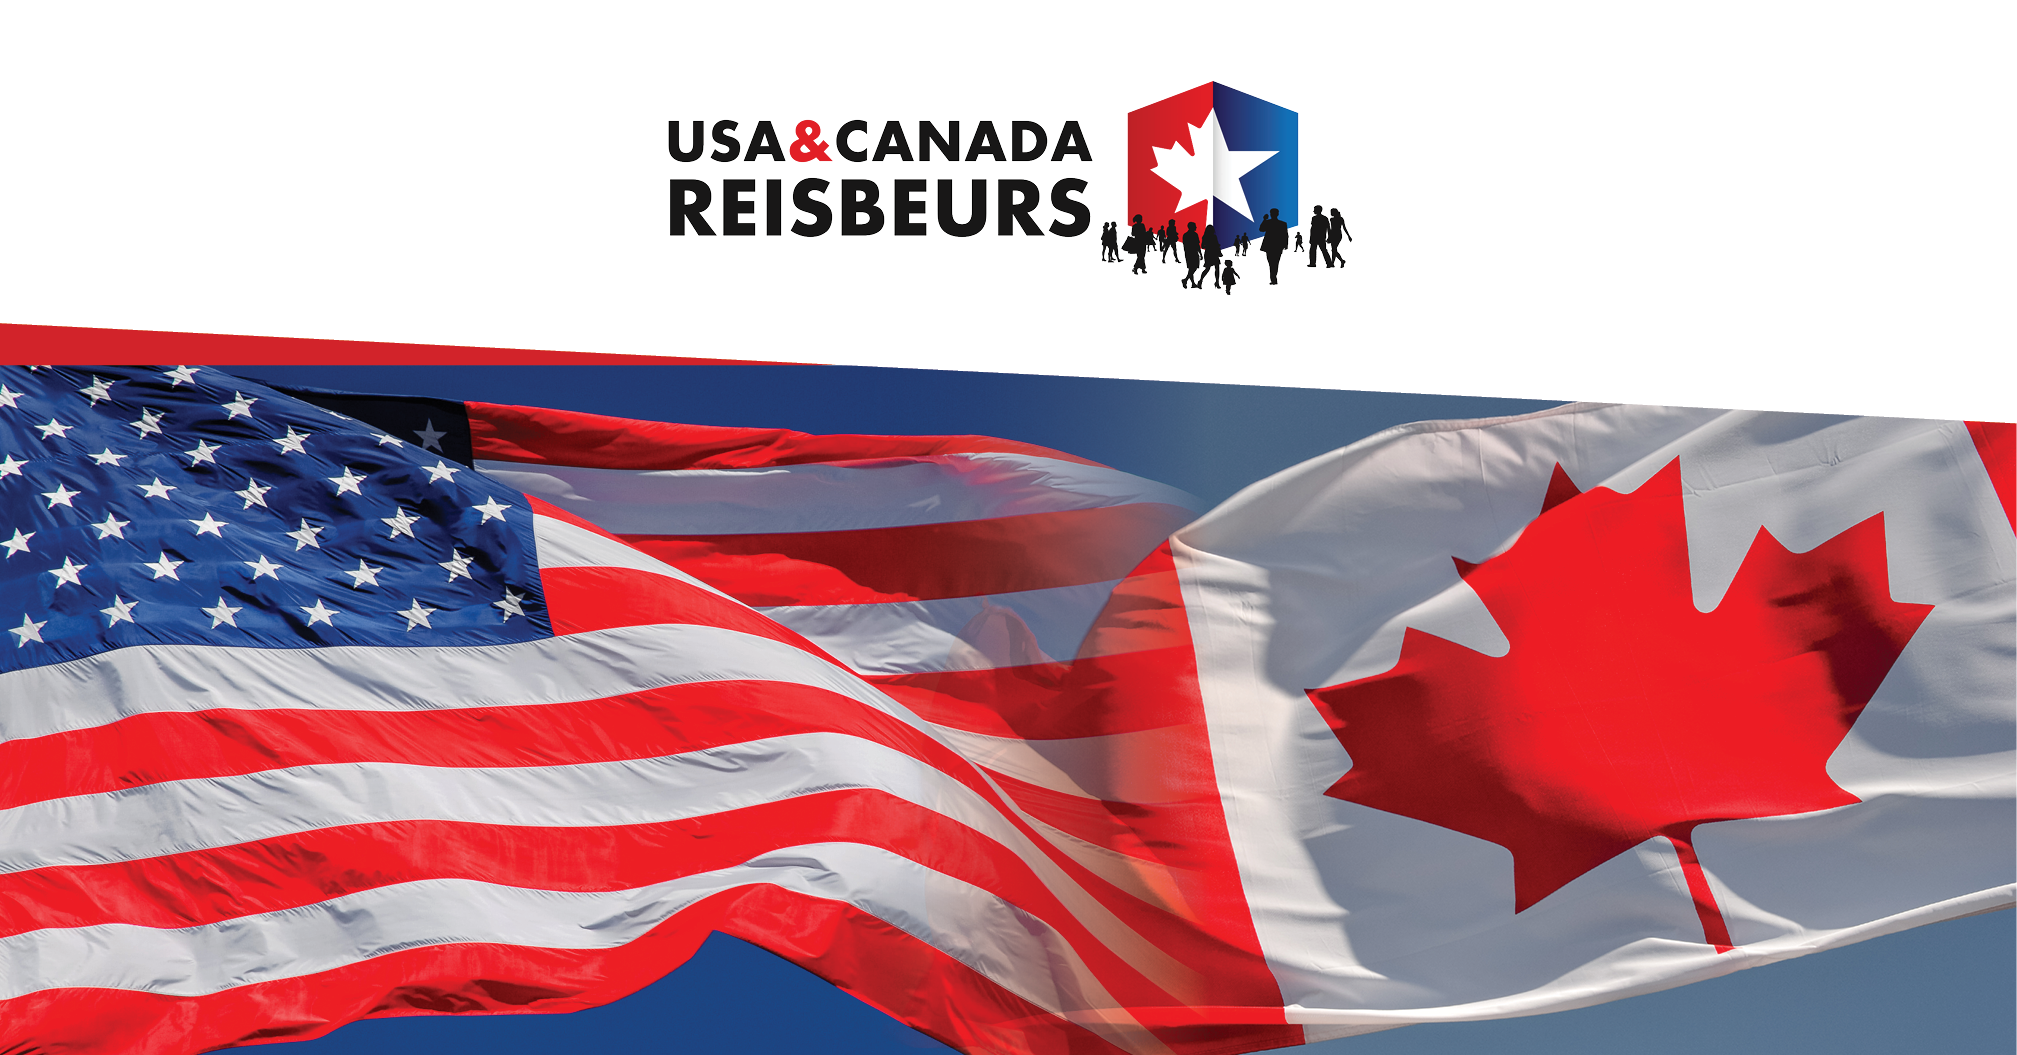 USA & Canada reisbeurs | Campers Canada